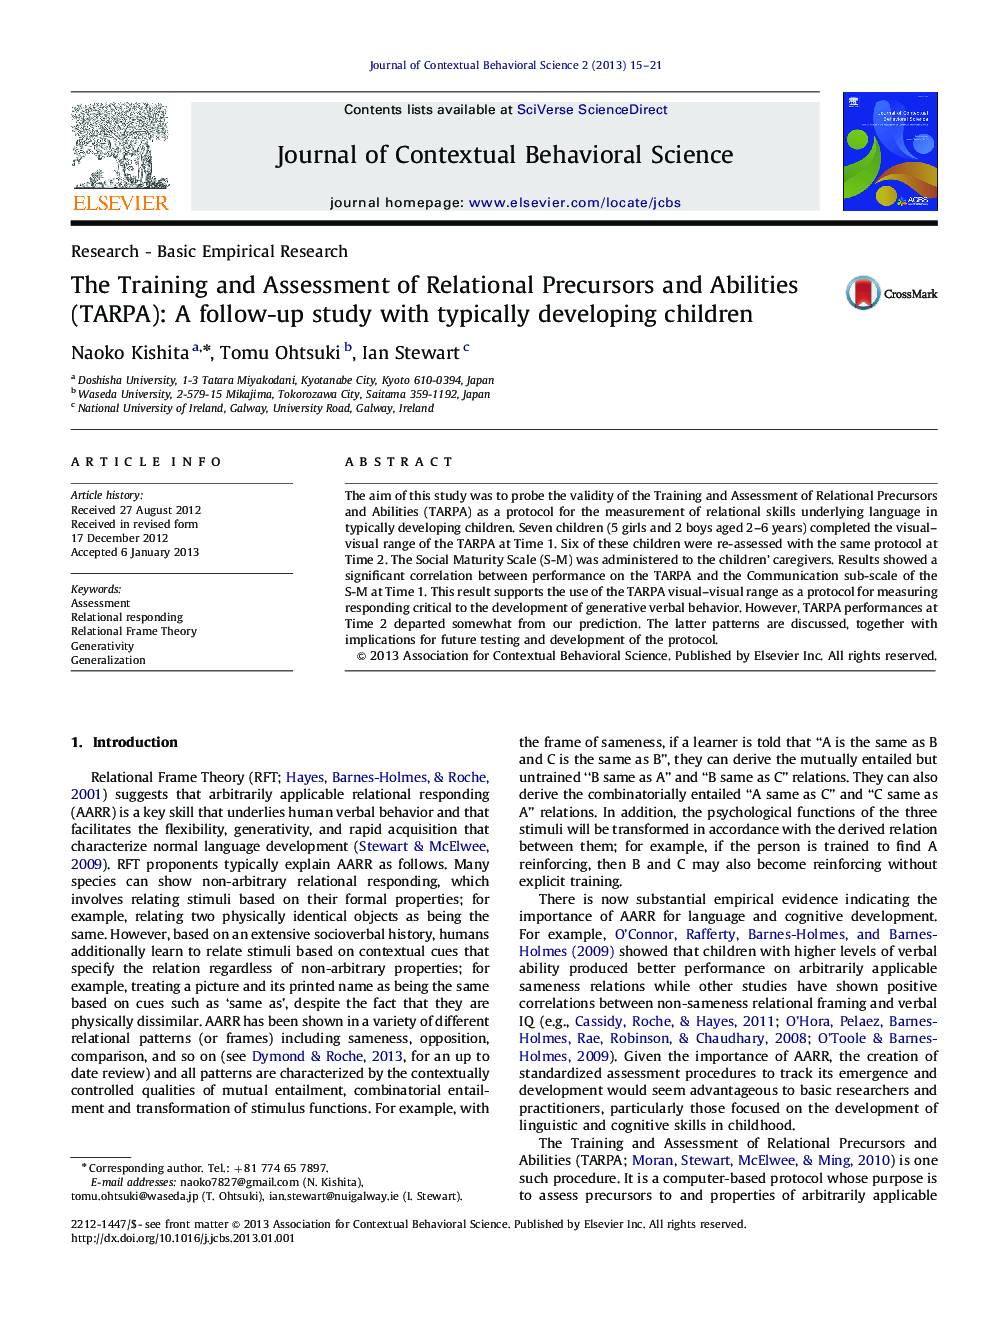 The Training and Assessment of Relational Precursors and Abilities (TARPA): A follow-up study with typically developing children